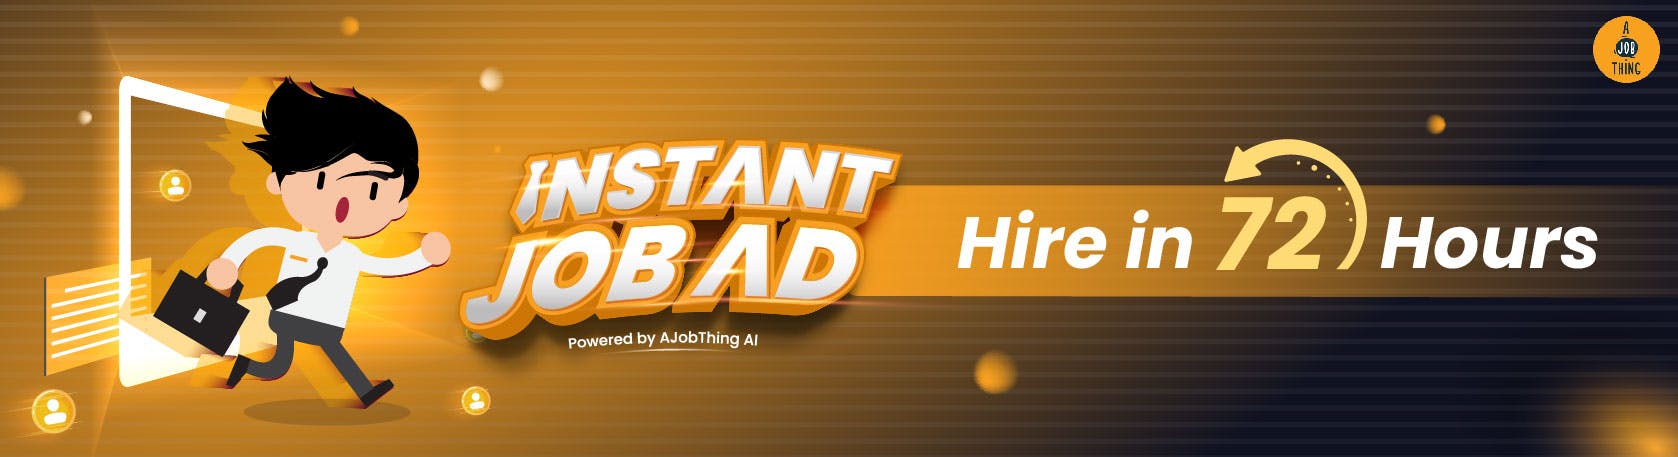 AJT AJobThing Instant Job Ad - Hire in 72 hours
